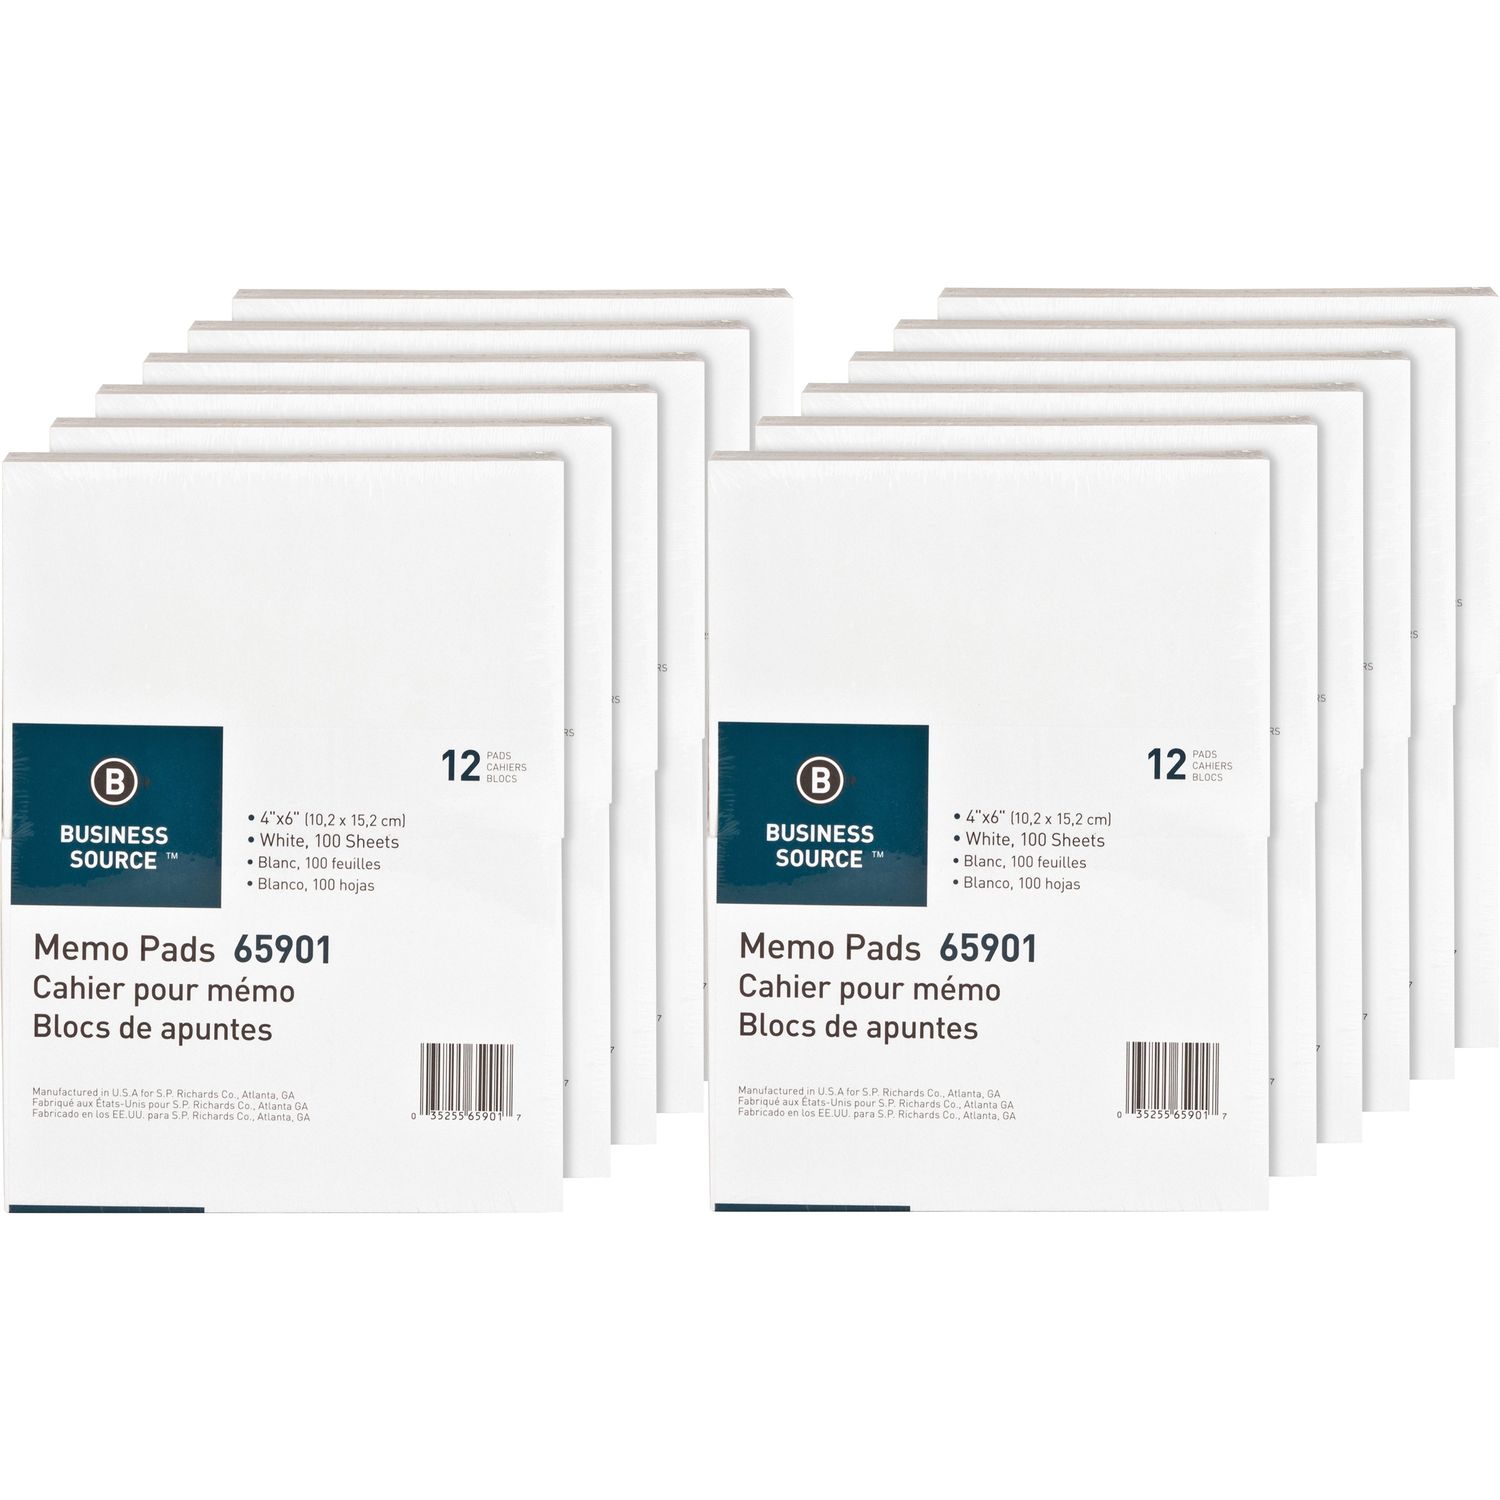 Plain Memo Pads 100 Sheets, Plain, Glued, Unruled, 15 lb Basis Weight, 4" x 6", White Paper, Chipboard Backing, 144 / Carton